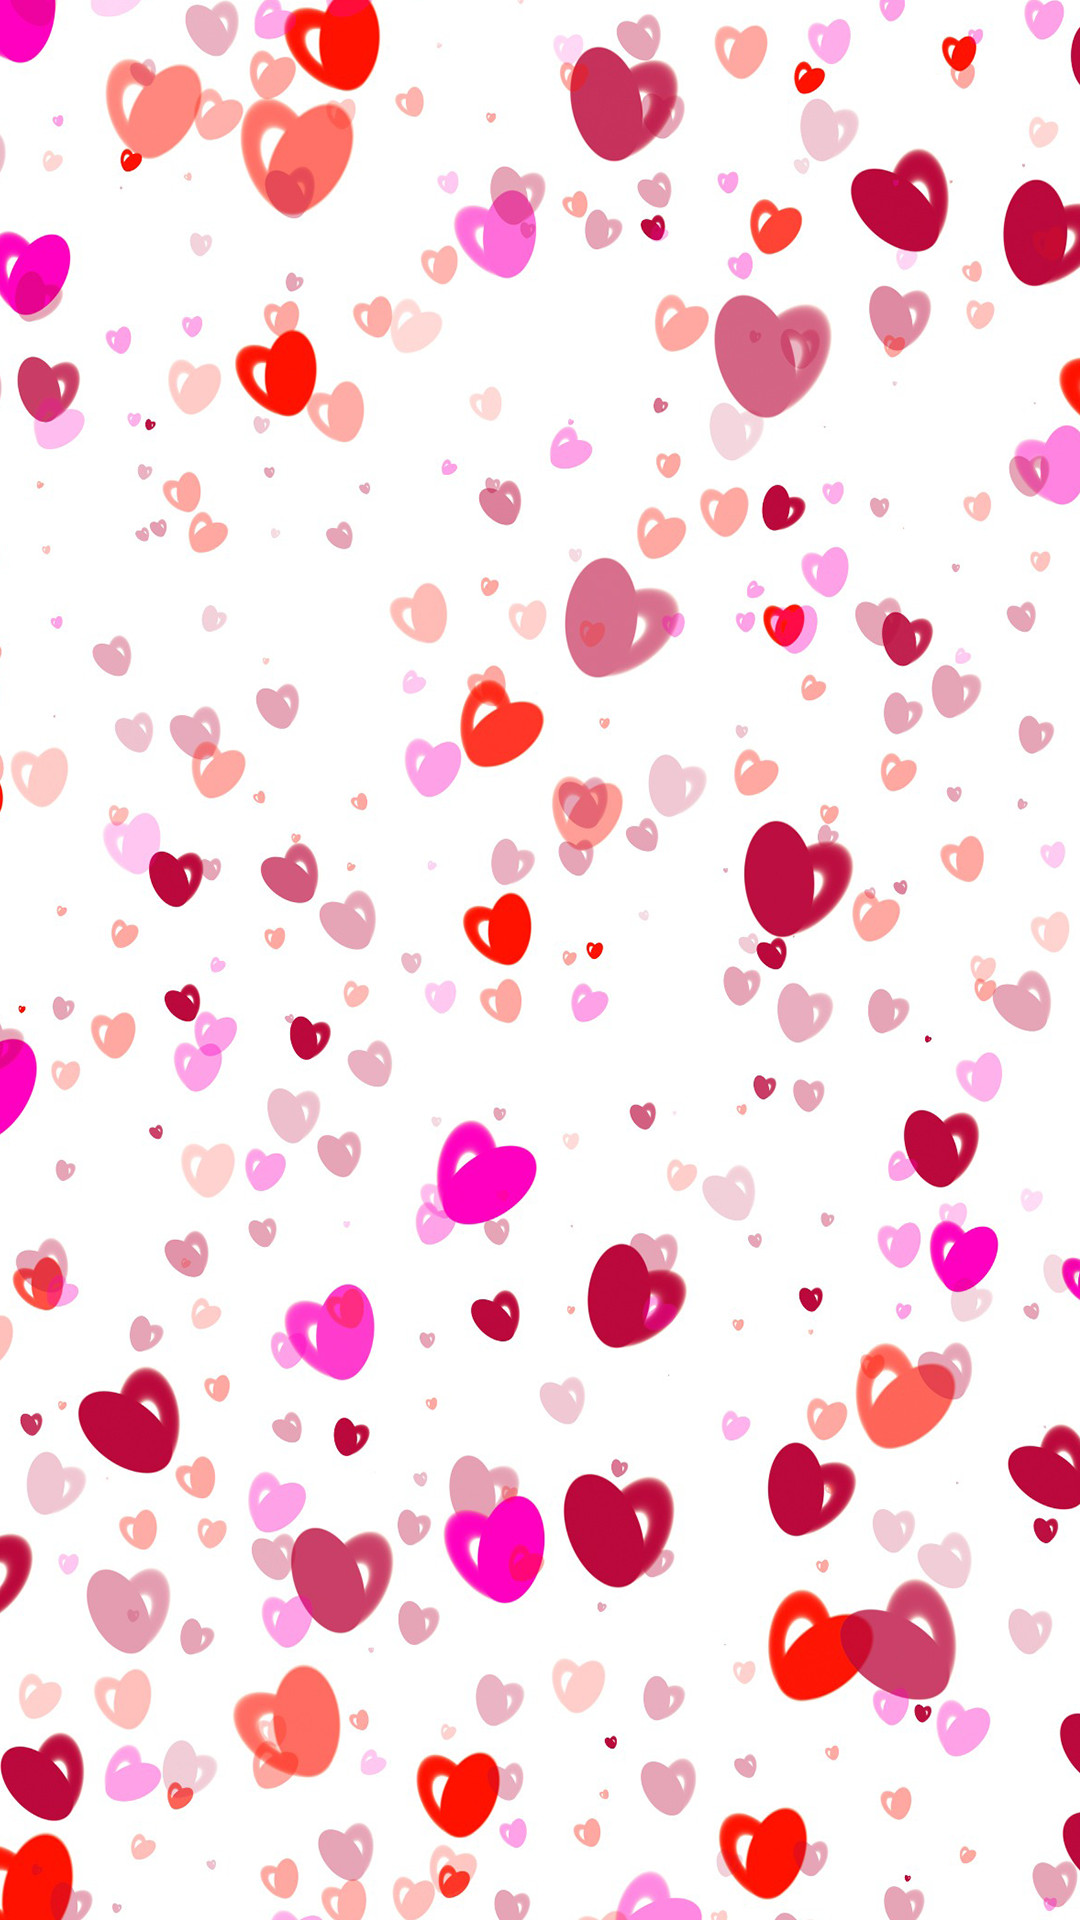 1080x1920 Ultra Hd Painted Love Hearts Wallpaper For Your Mobile Phone 0199